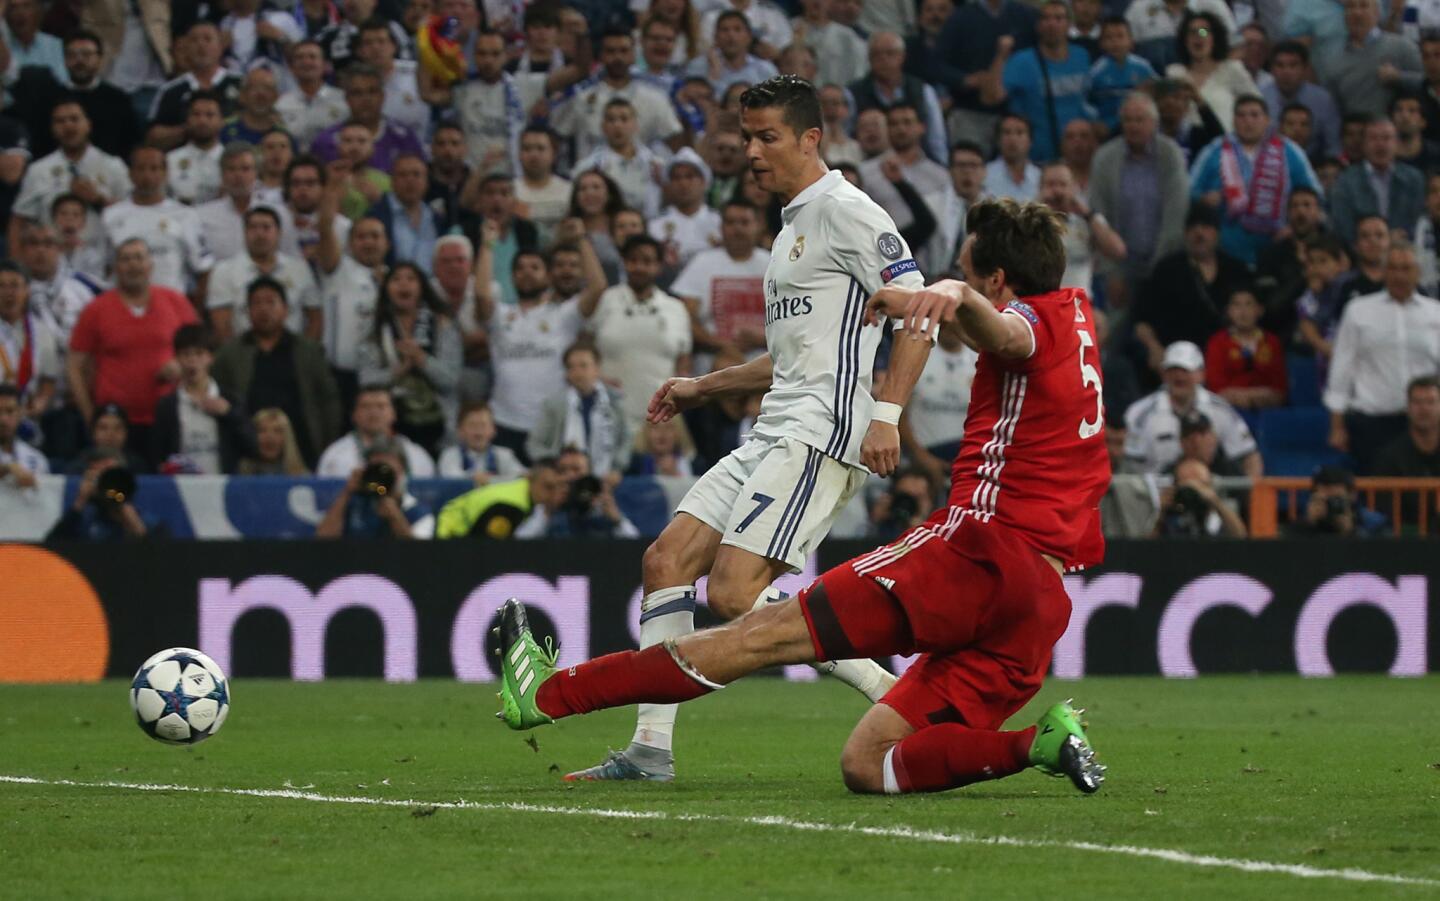 Football Soccer - Real Madrid v Bayern Munich - UEFA Champions League Quarter Final Second Leg - Estadio Santiago Bernabeu, Madrid, Spain - 18/4/17 Real Madrid's Cristiano Ronaldo scores their third goal to complete his hat trick Reuters / Sergio Perez Livepic ** Usable by SD ONLY **